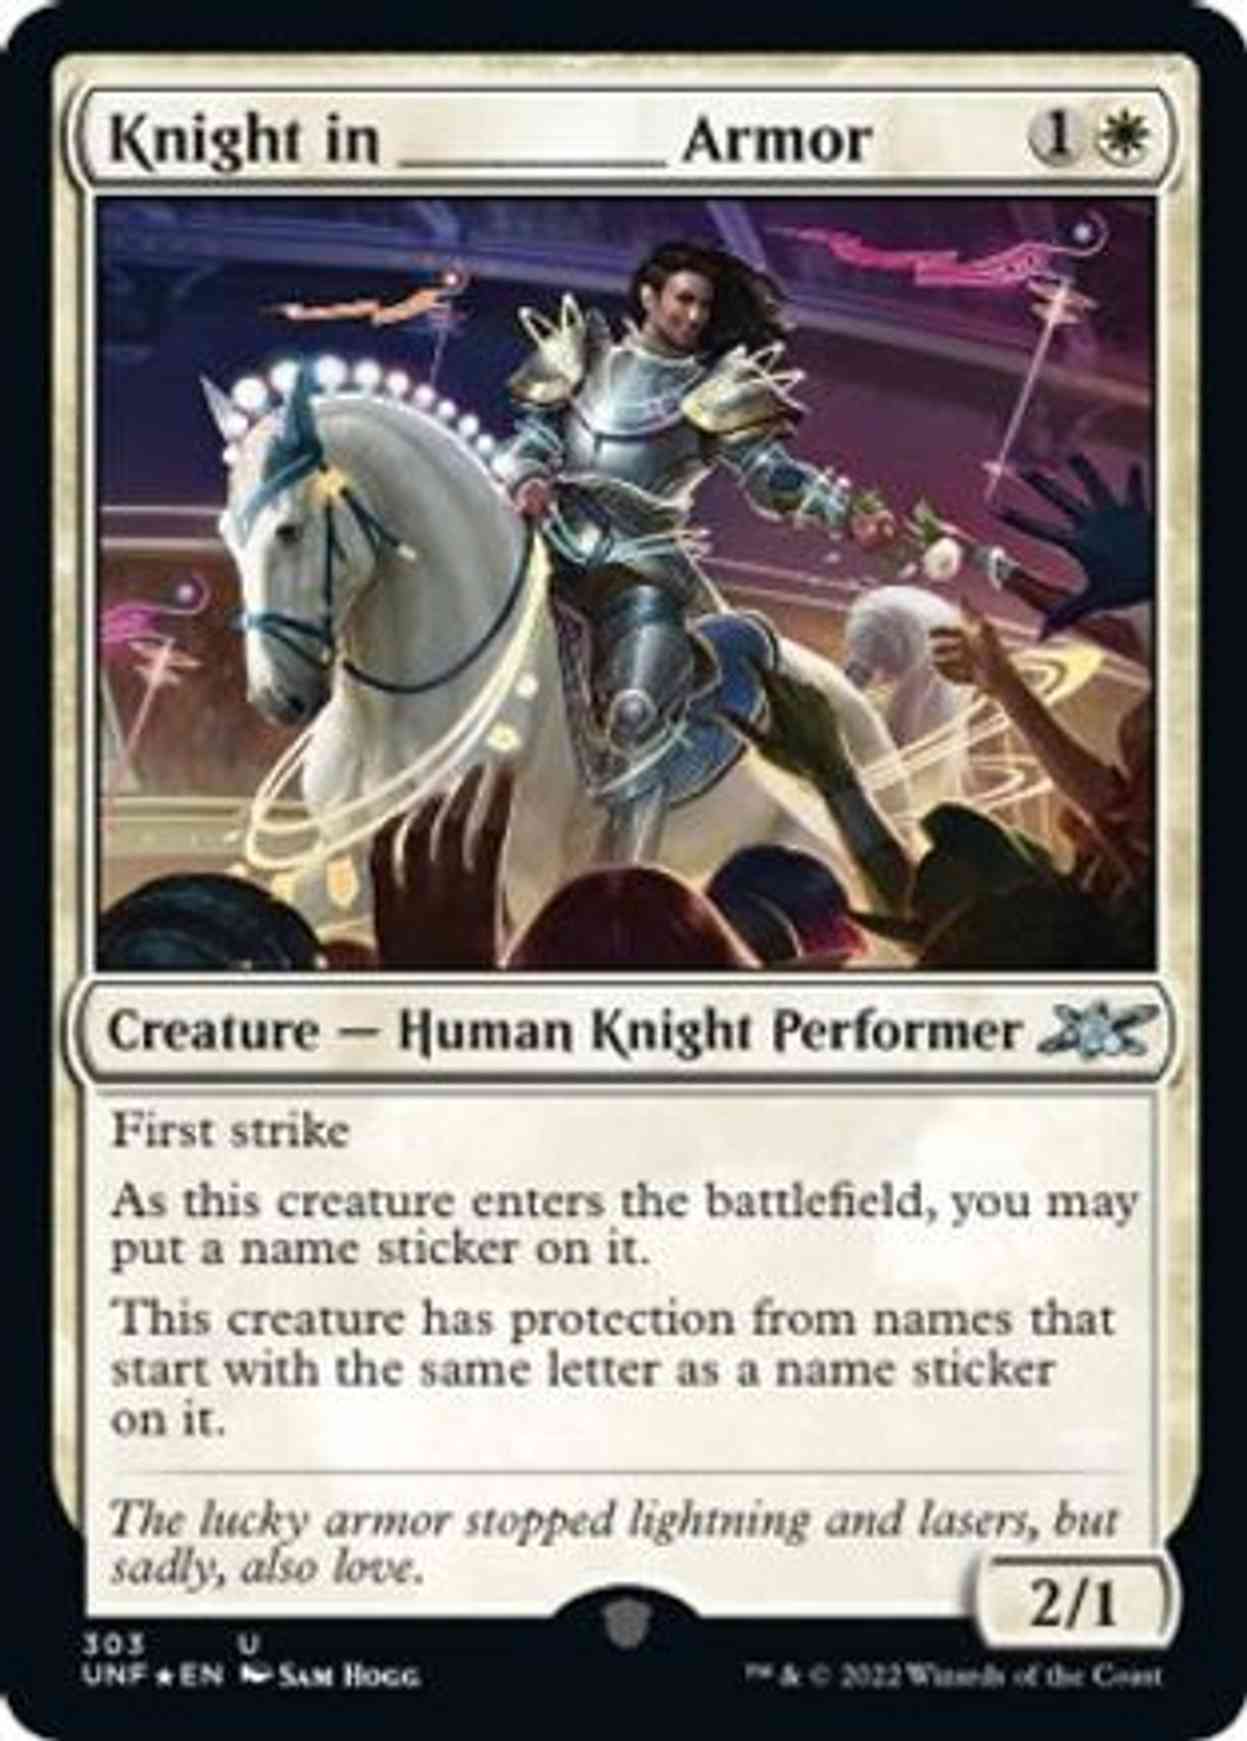 Knight in _____ Armor (Galaxy Foil) magic card front